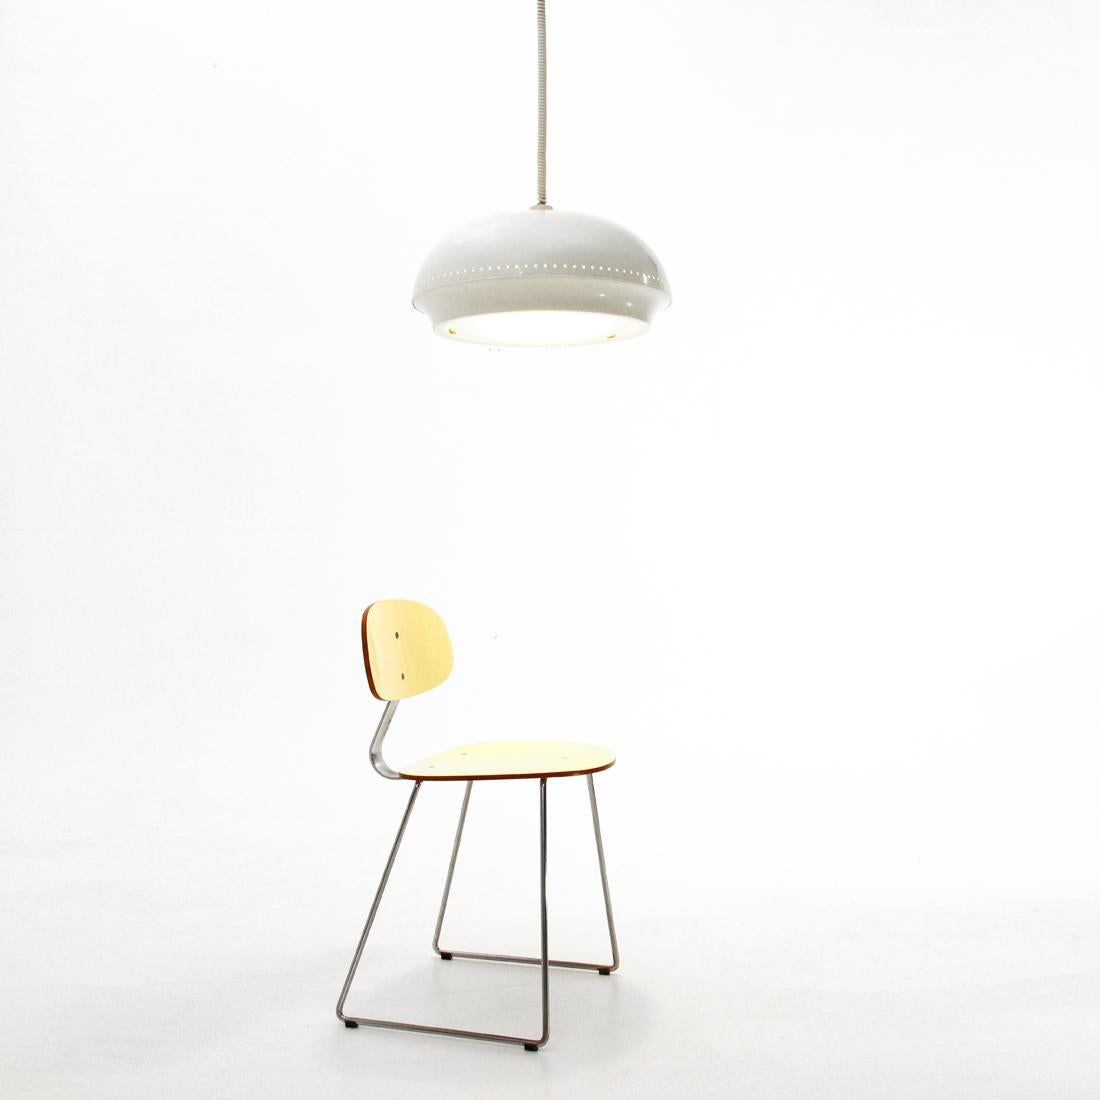 White 'Nigritella' Pendant Lamp by Tobia Scarpa for Flos, 1960s For Sale 6